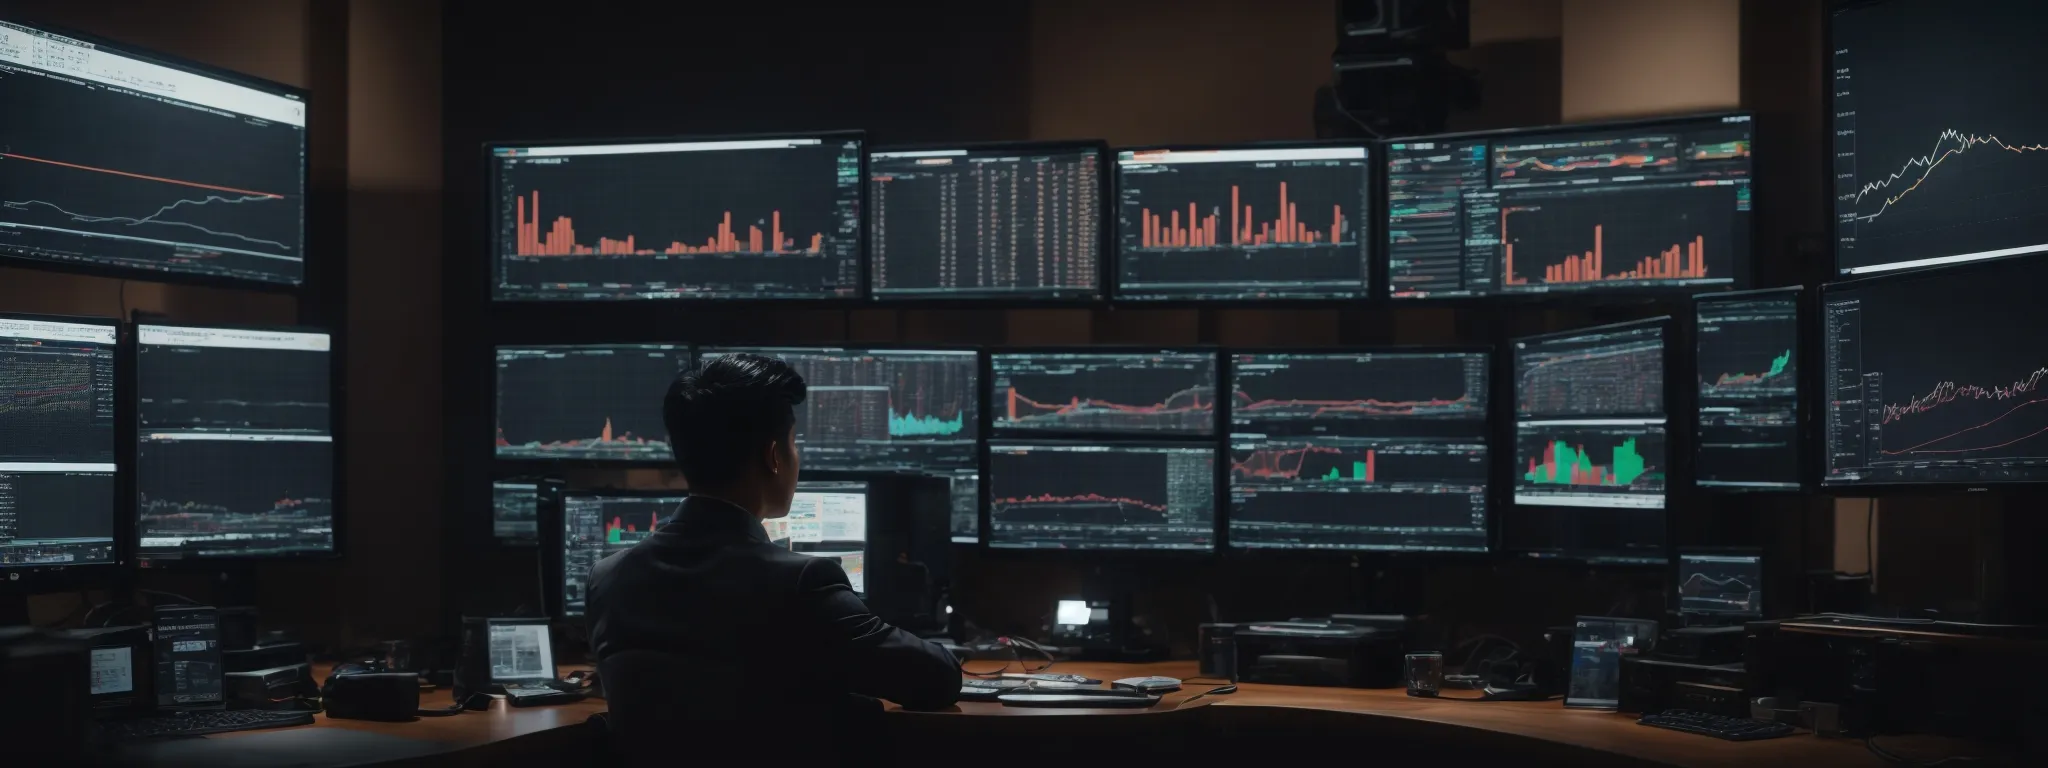 a marketer sits before a wide, multi-screen computer setup, deeply focused on analytics dashboards that reveal insights into audience trends and behaviors.